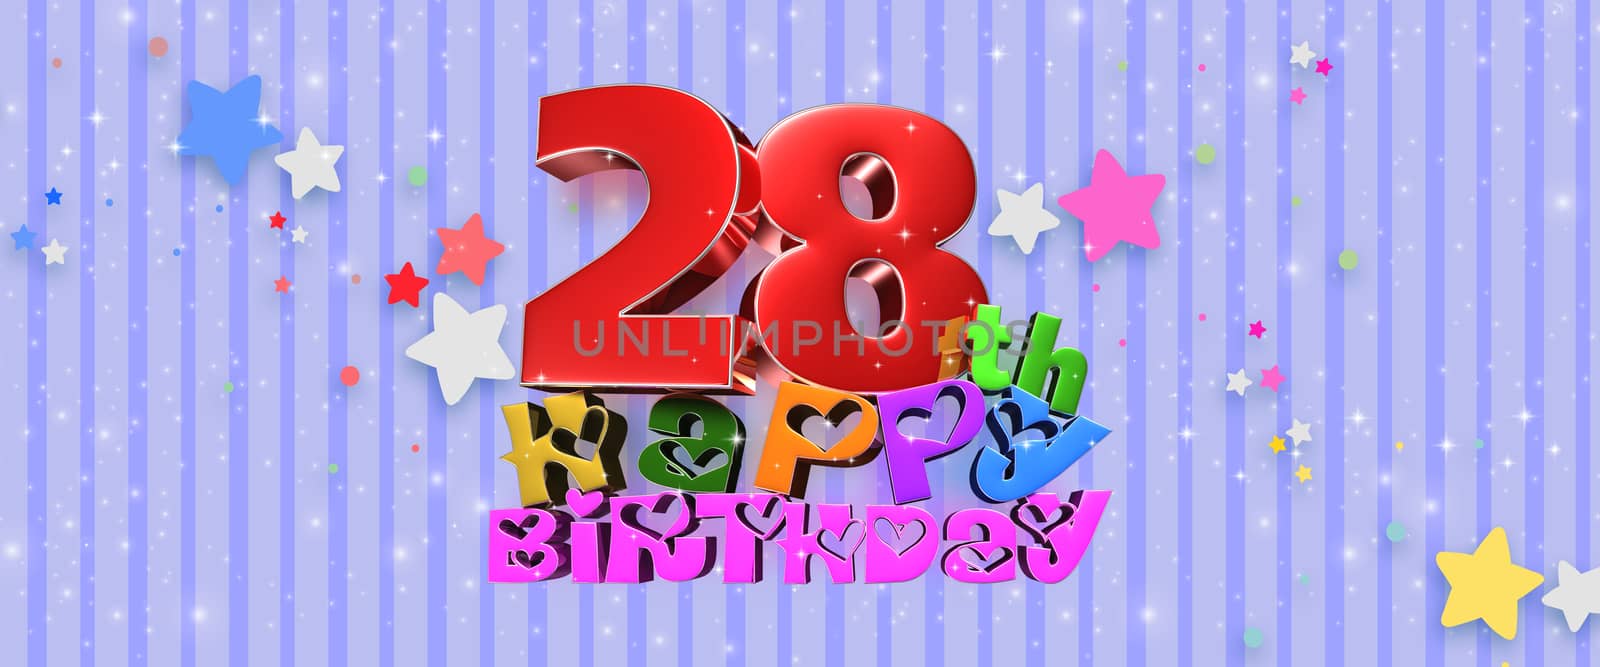 Happy Birthday  28 th 3d illustration Blue background with glittering stars.